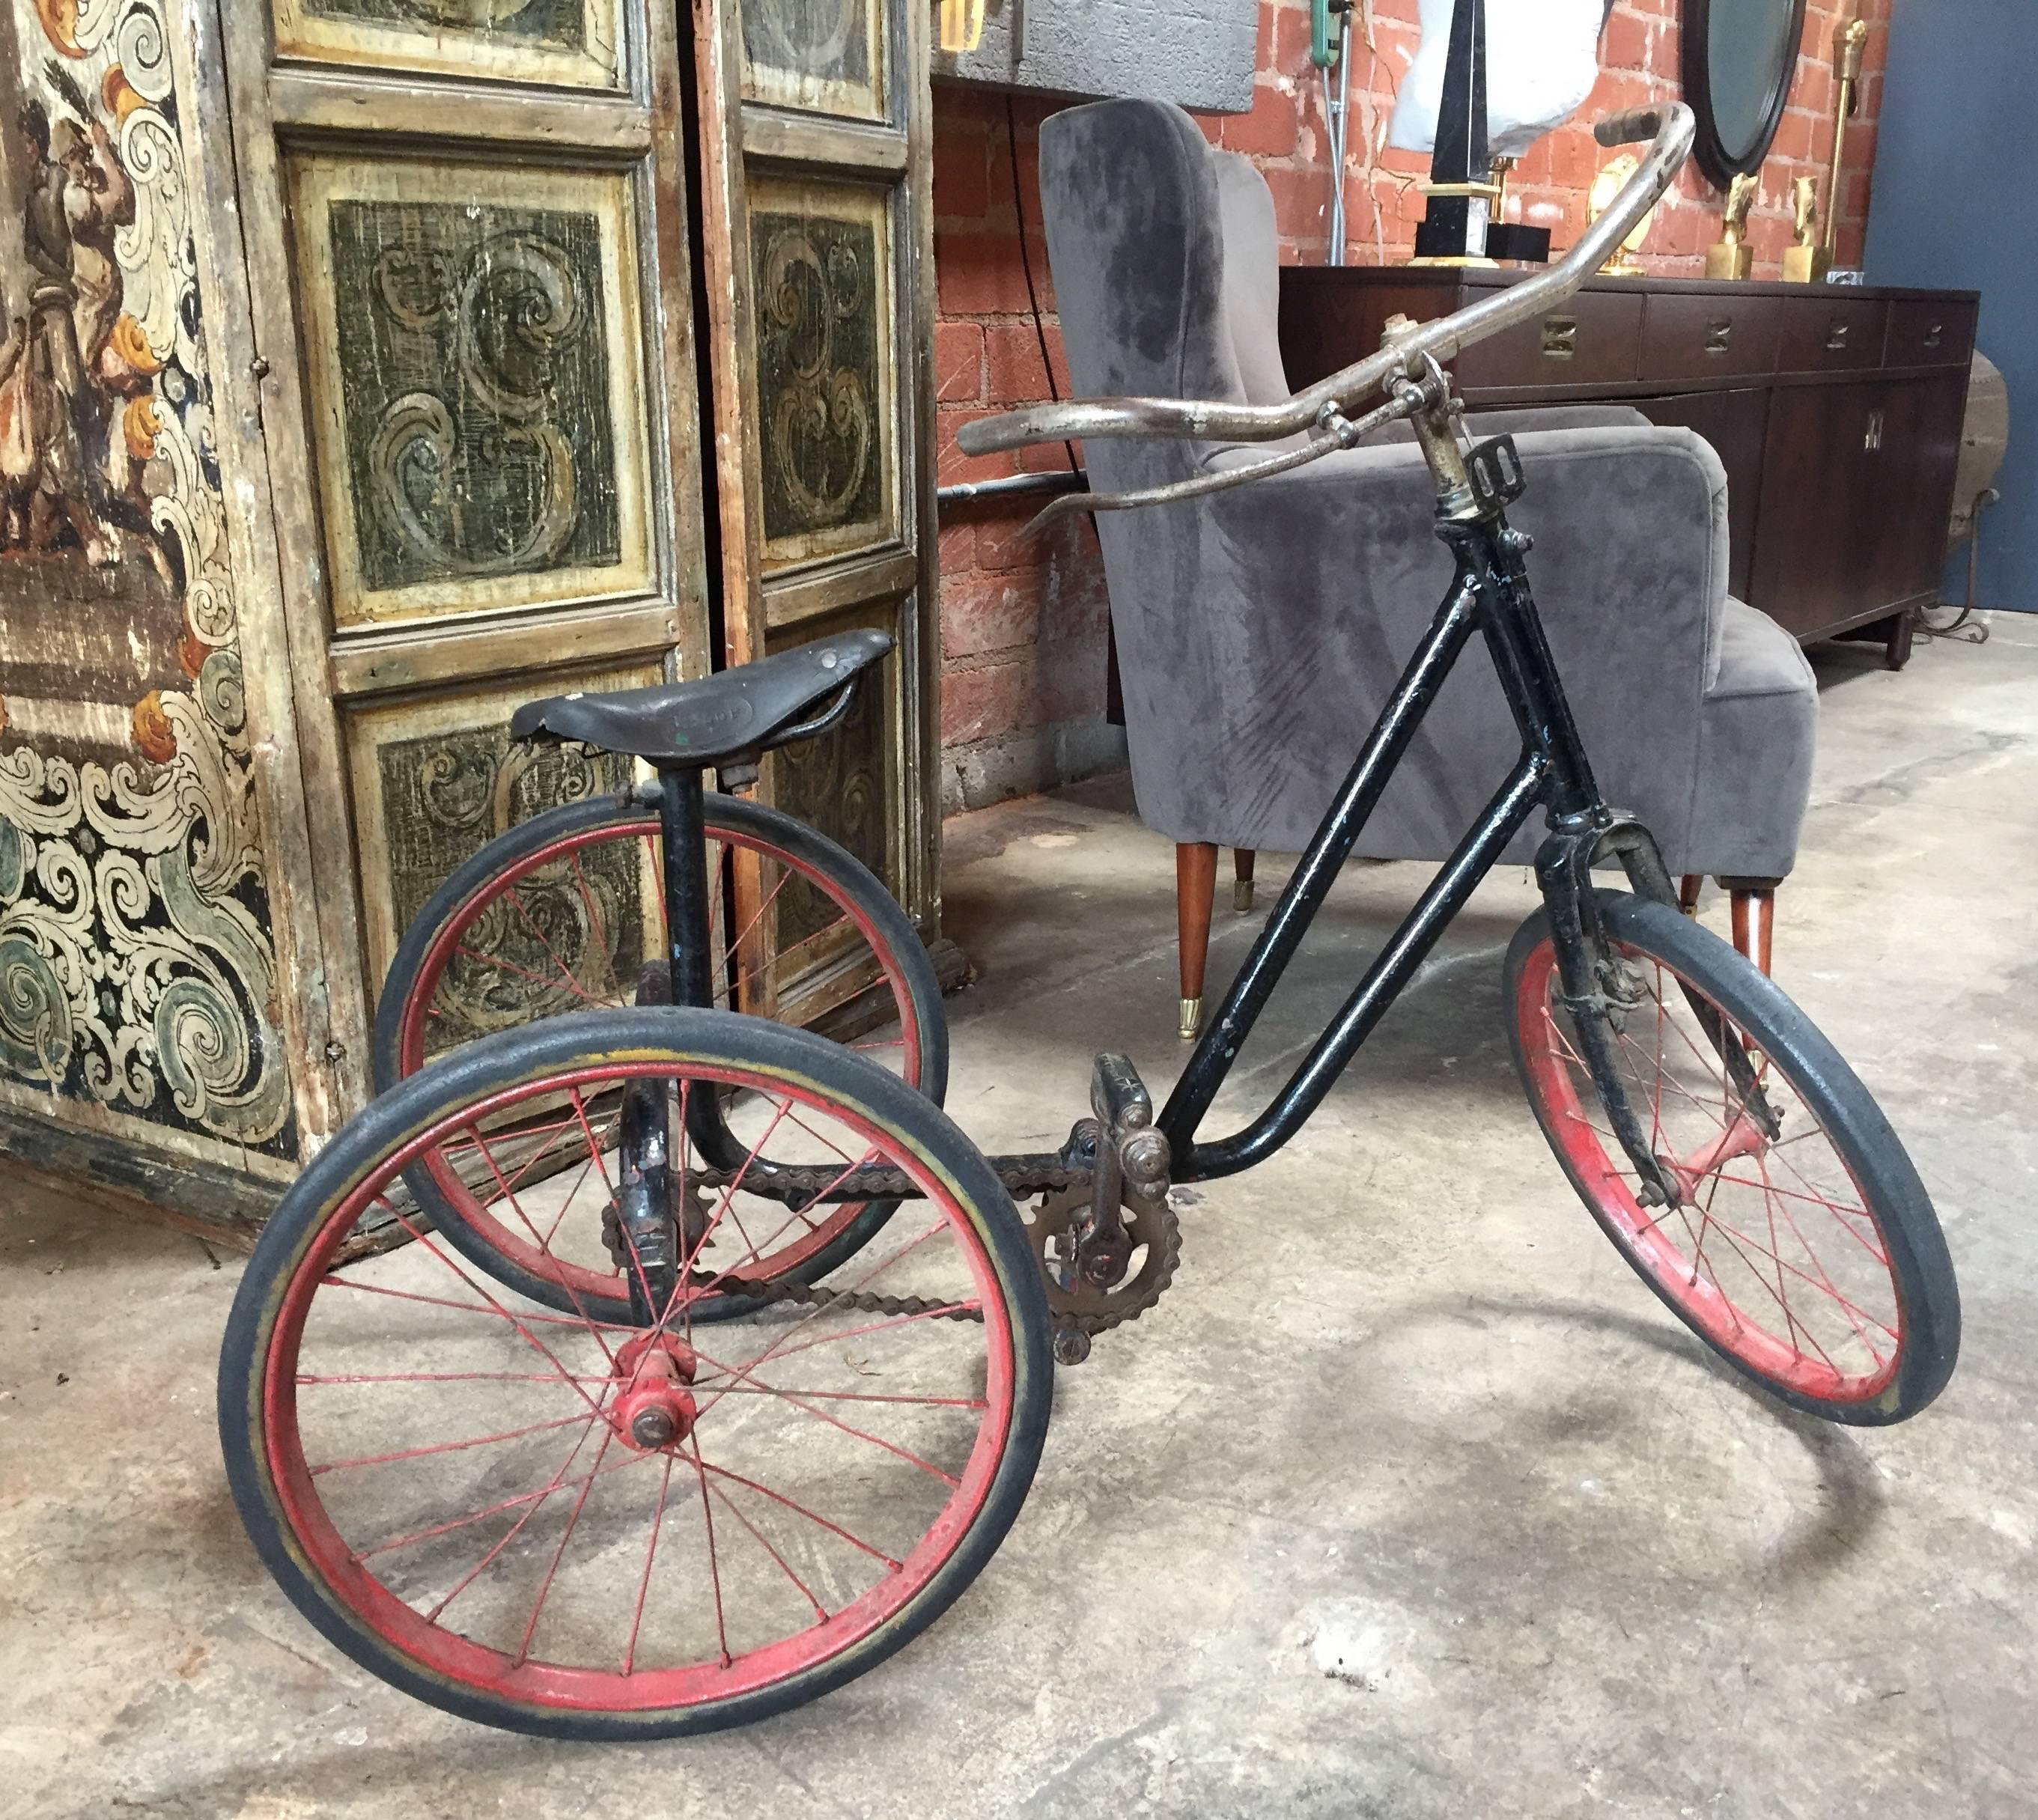 1920s tricycle